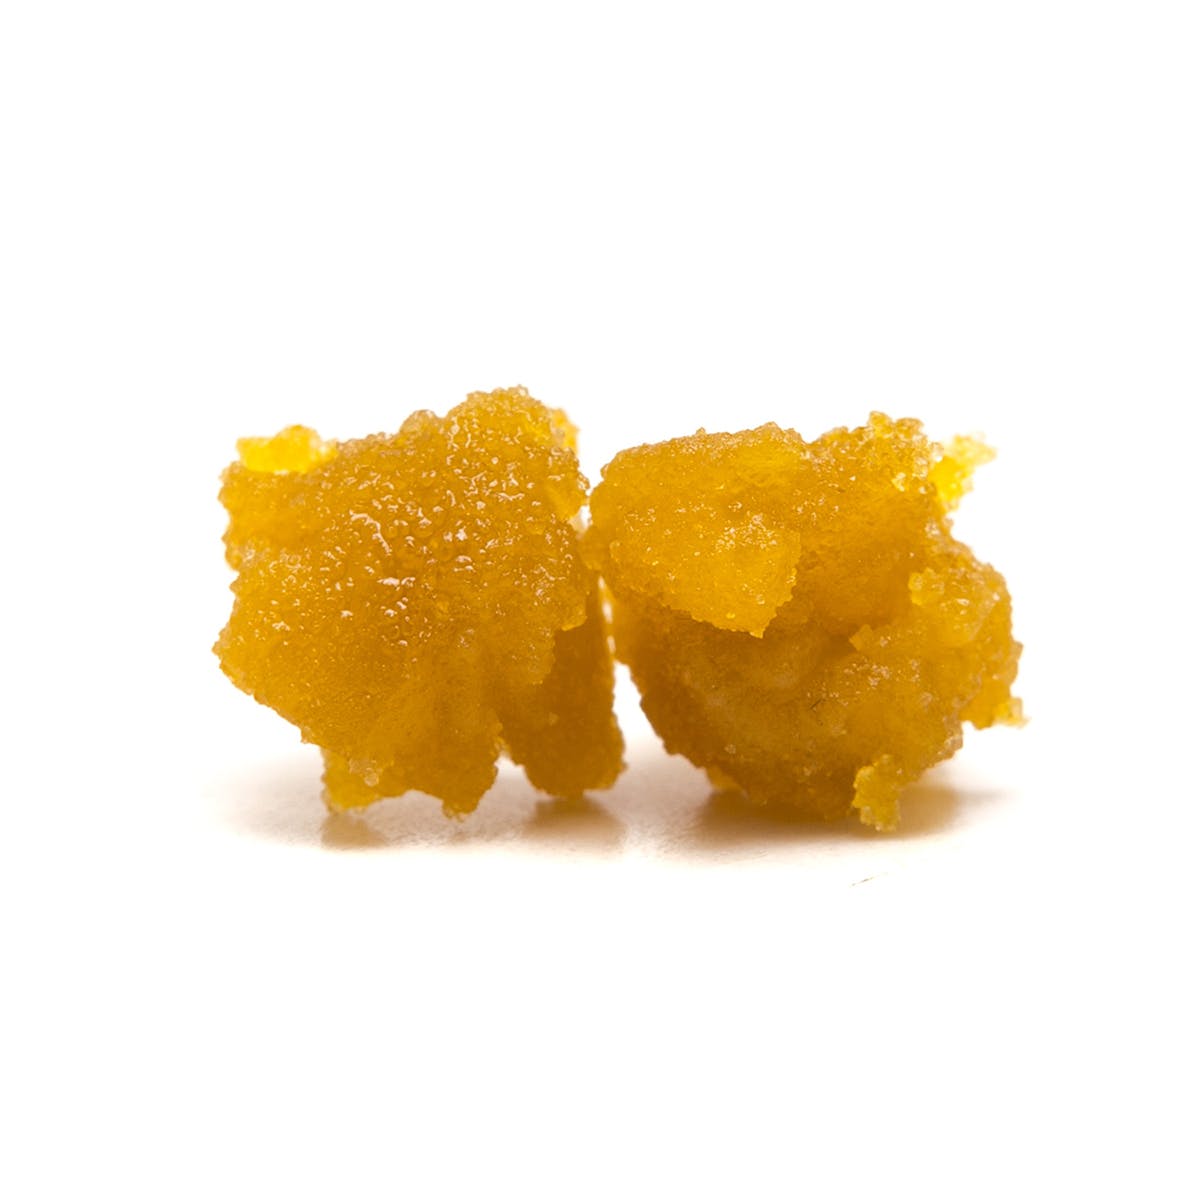 concentrate-jilly-bean-live-resin-sugar